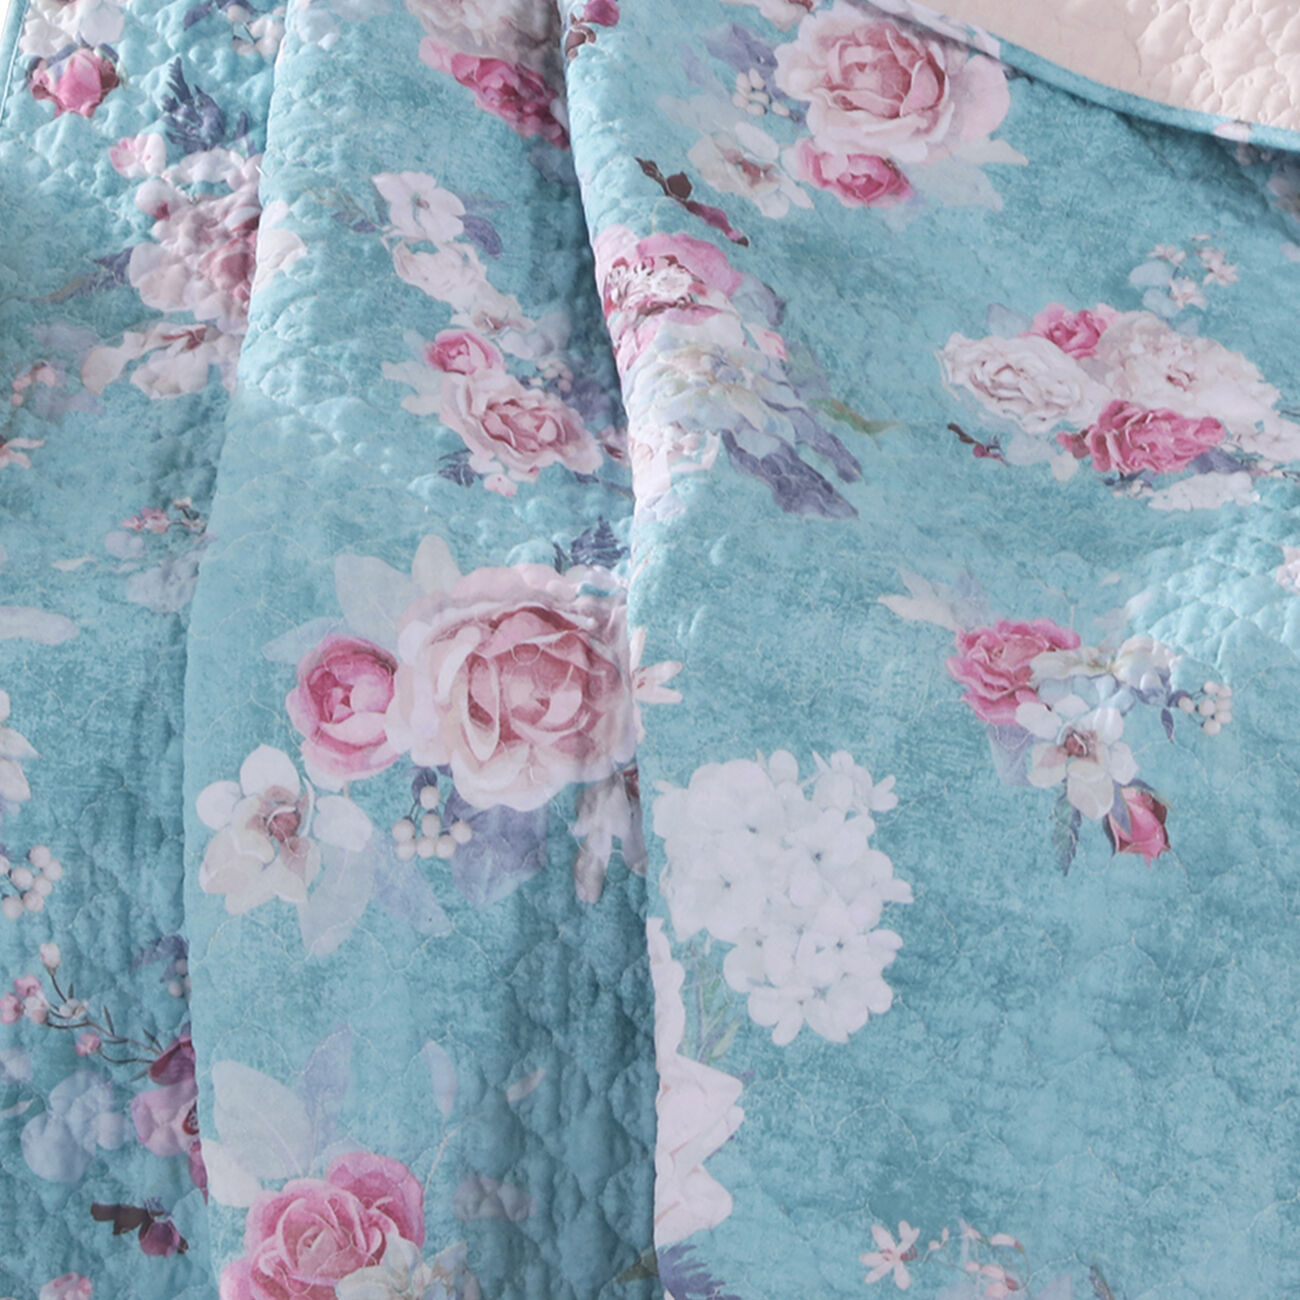 60 x 50 Inches Polyester Throw Blanket with Floral Print, Blue and White